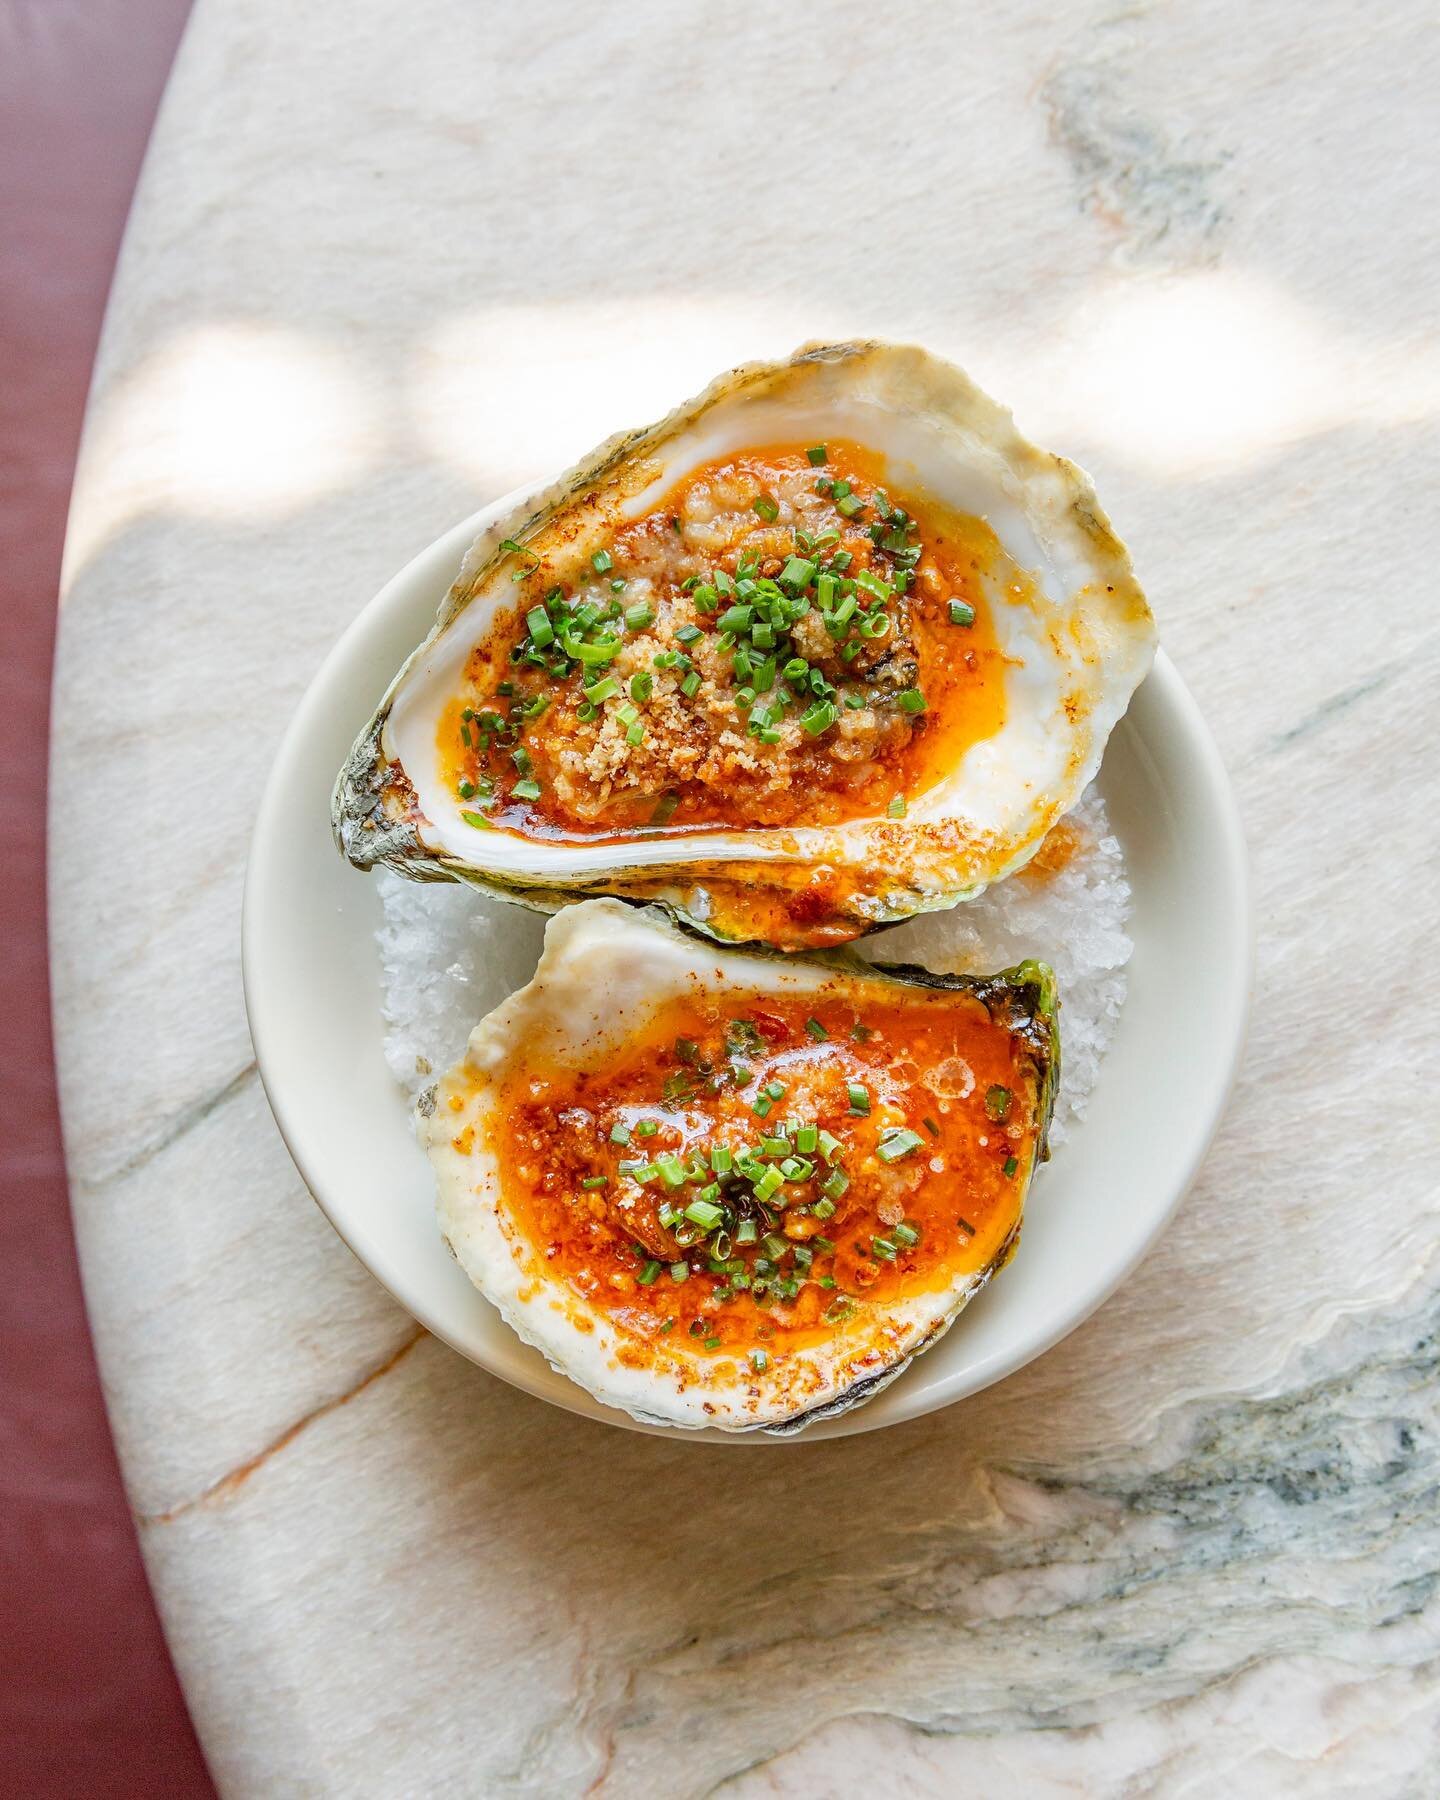 Happy Friday! Kick off your weekend with one of our staples &mdash; broiled Maine oysters with garlic chili butter + bread crumbs 📸 @starchefs